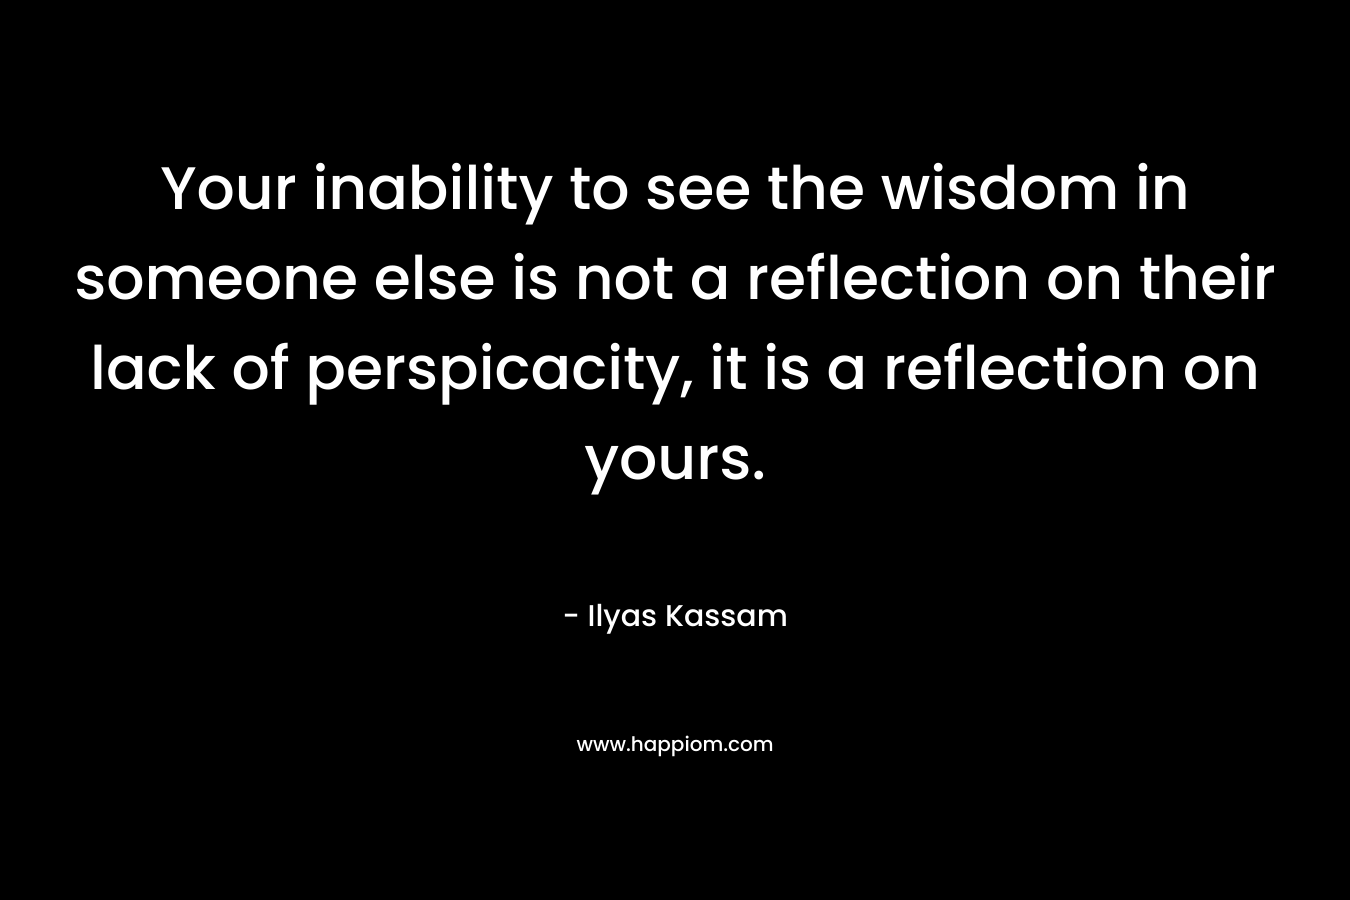 Your inability to see the wisdom in someone else is not a reflection on their lack of perspicacity, it is a reflection on yours.